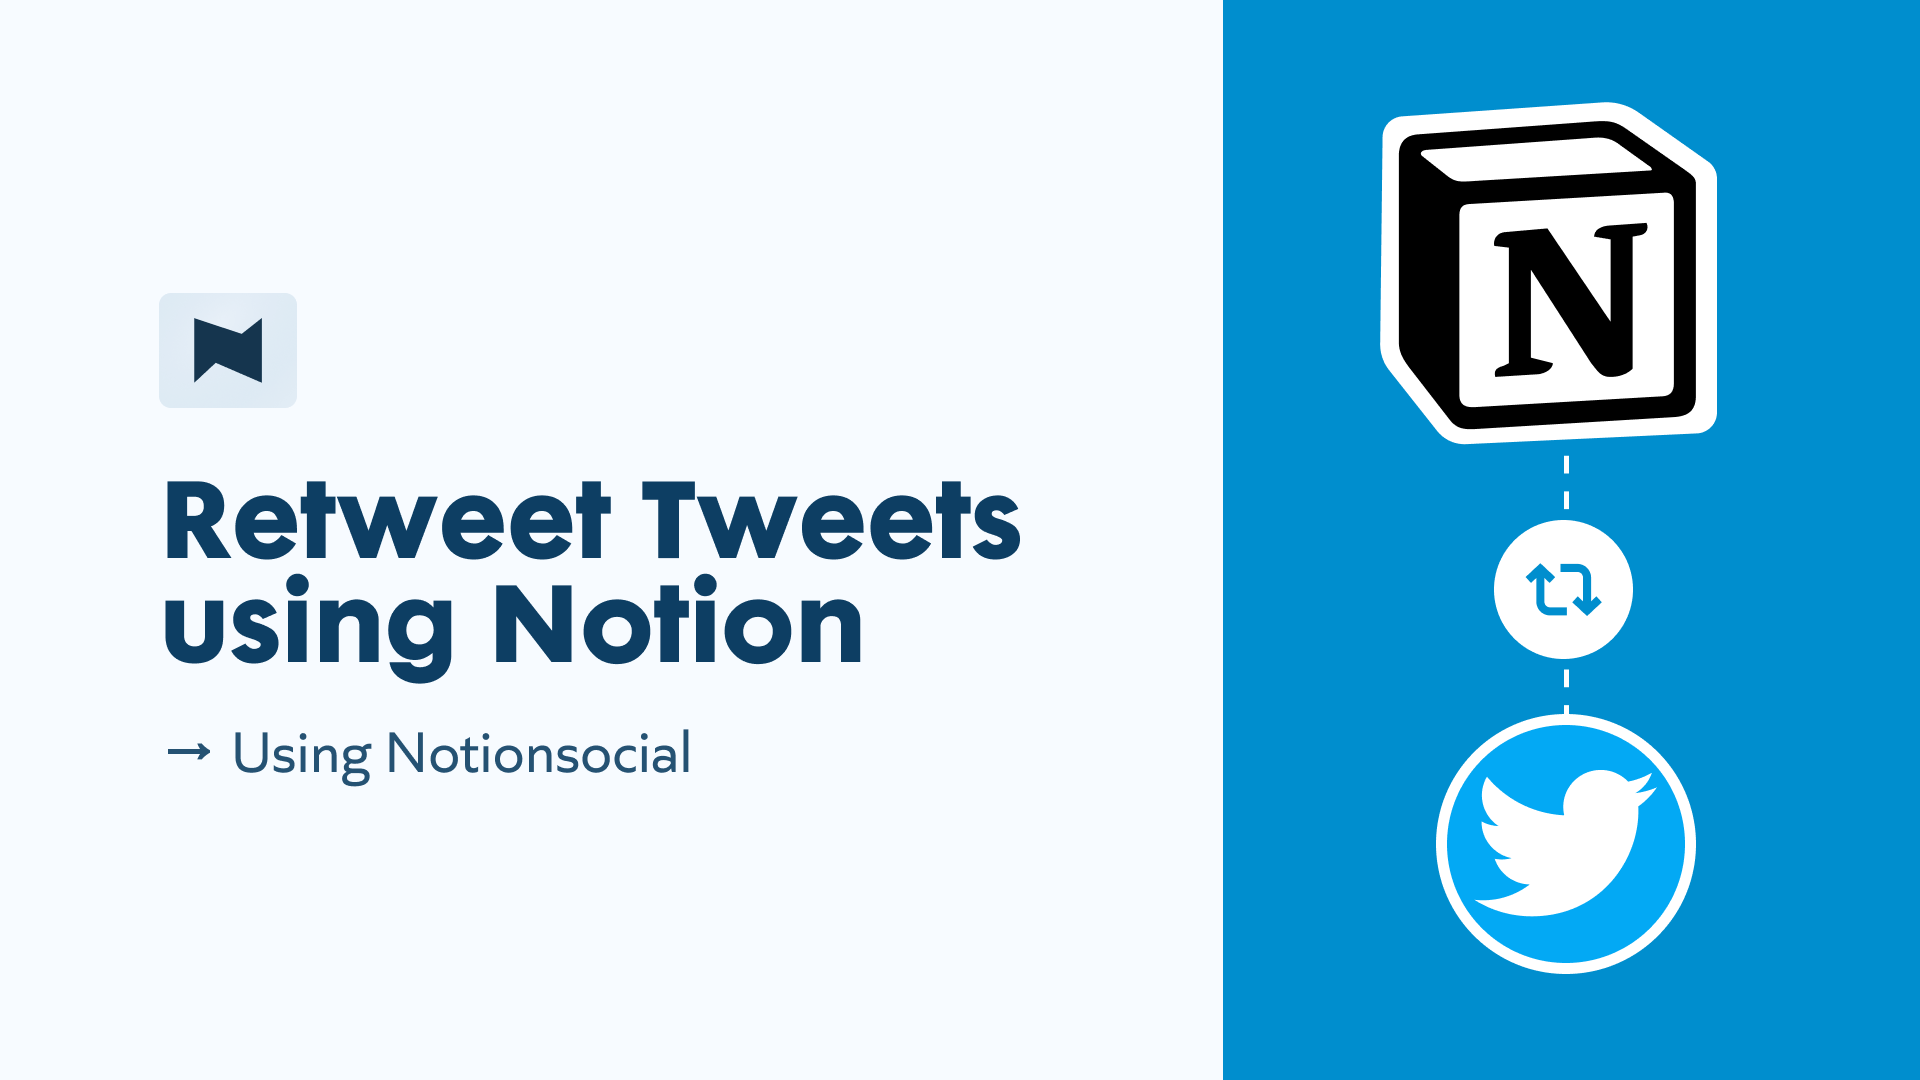 How to Retweet Tweets using Notionsocial